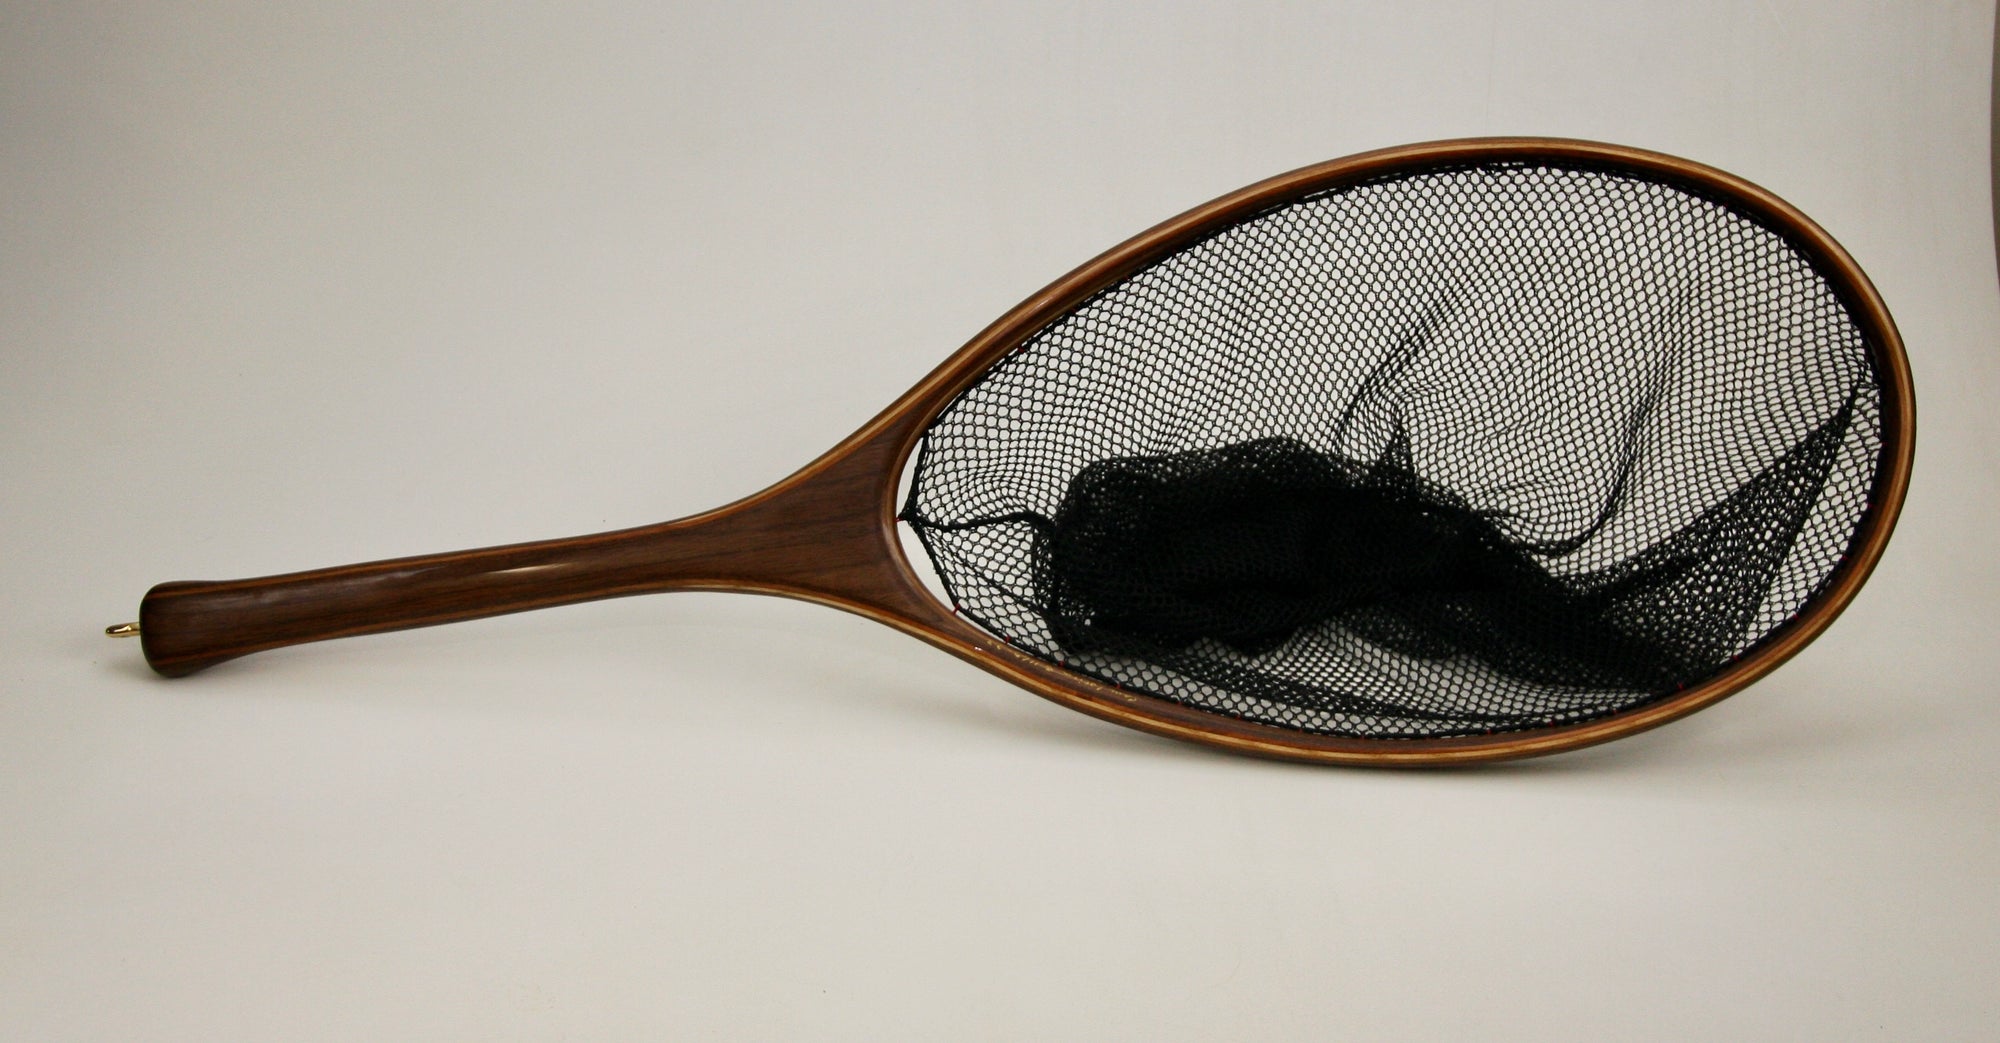 Custom wooden catch and release landing nets in stock, ready to